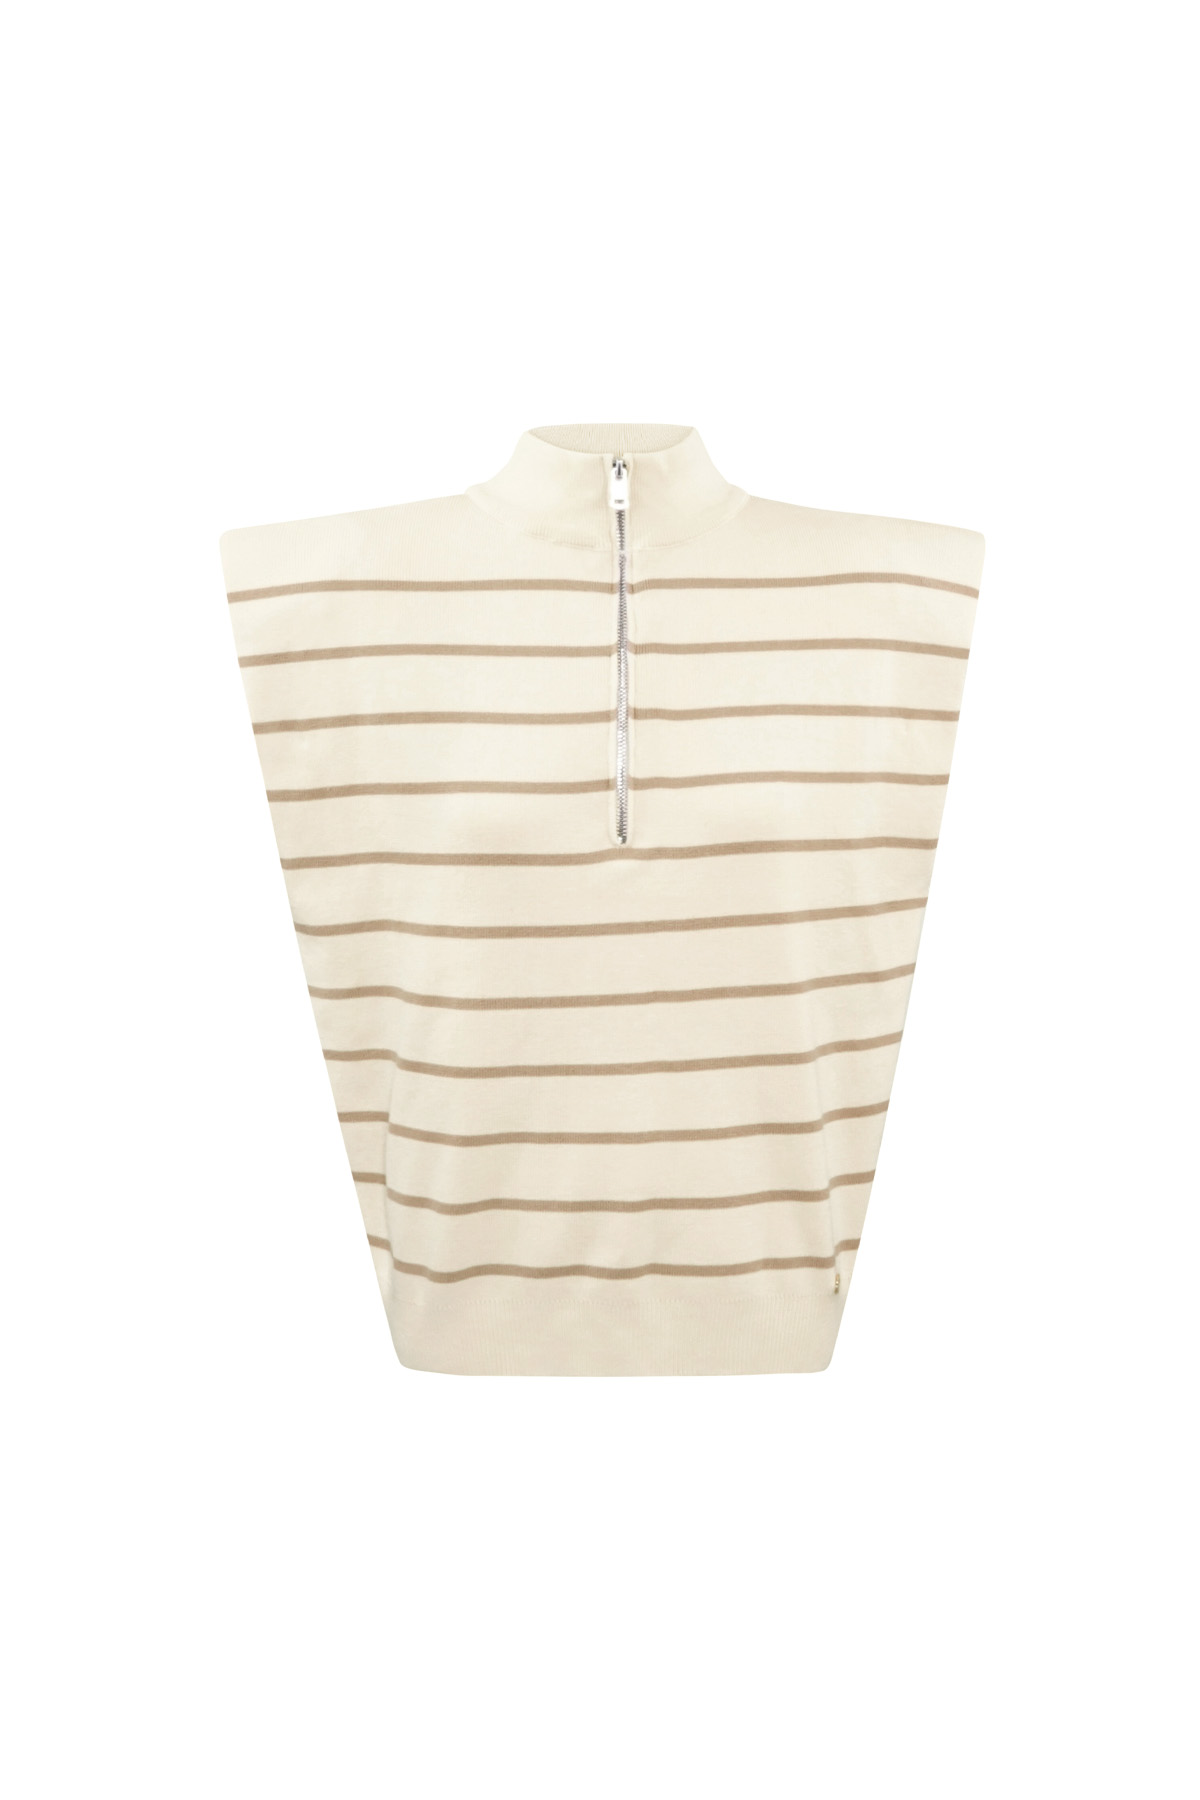 Striped spencer with zipper - beige brown